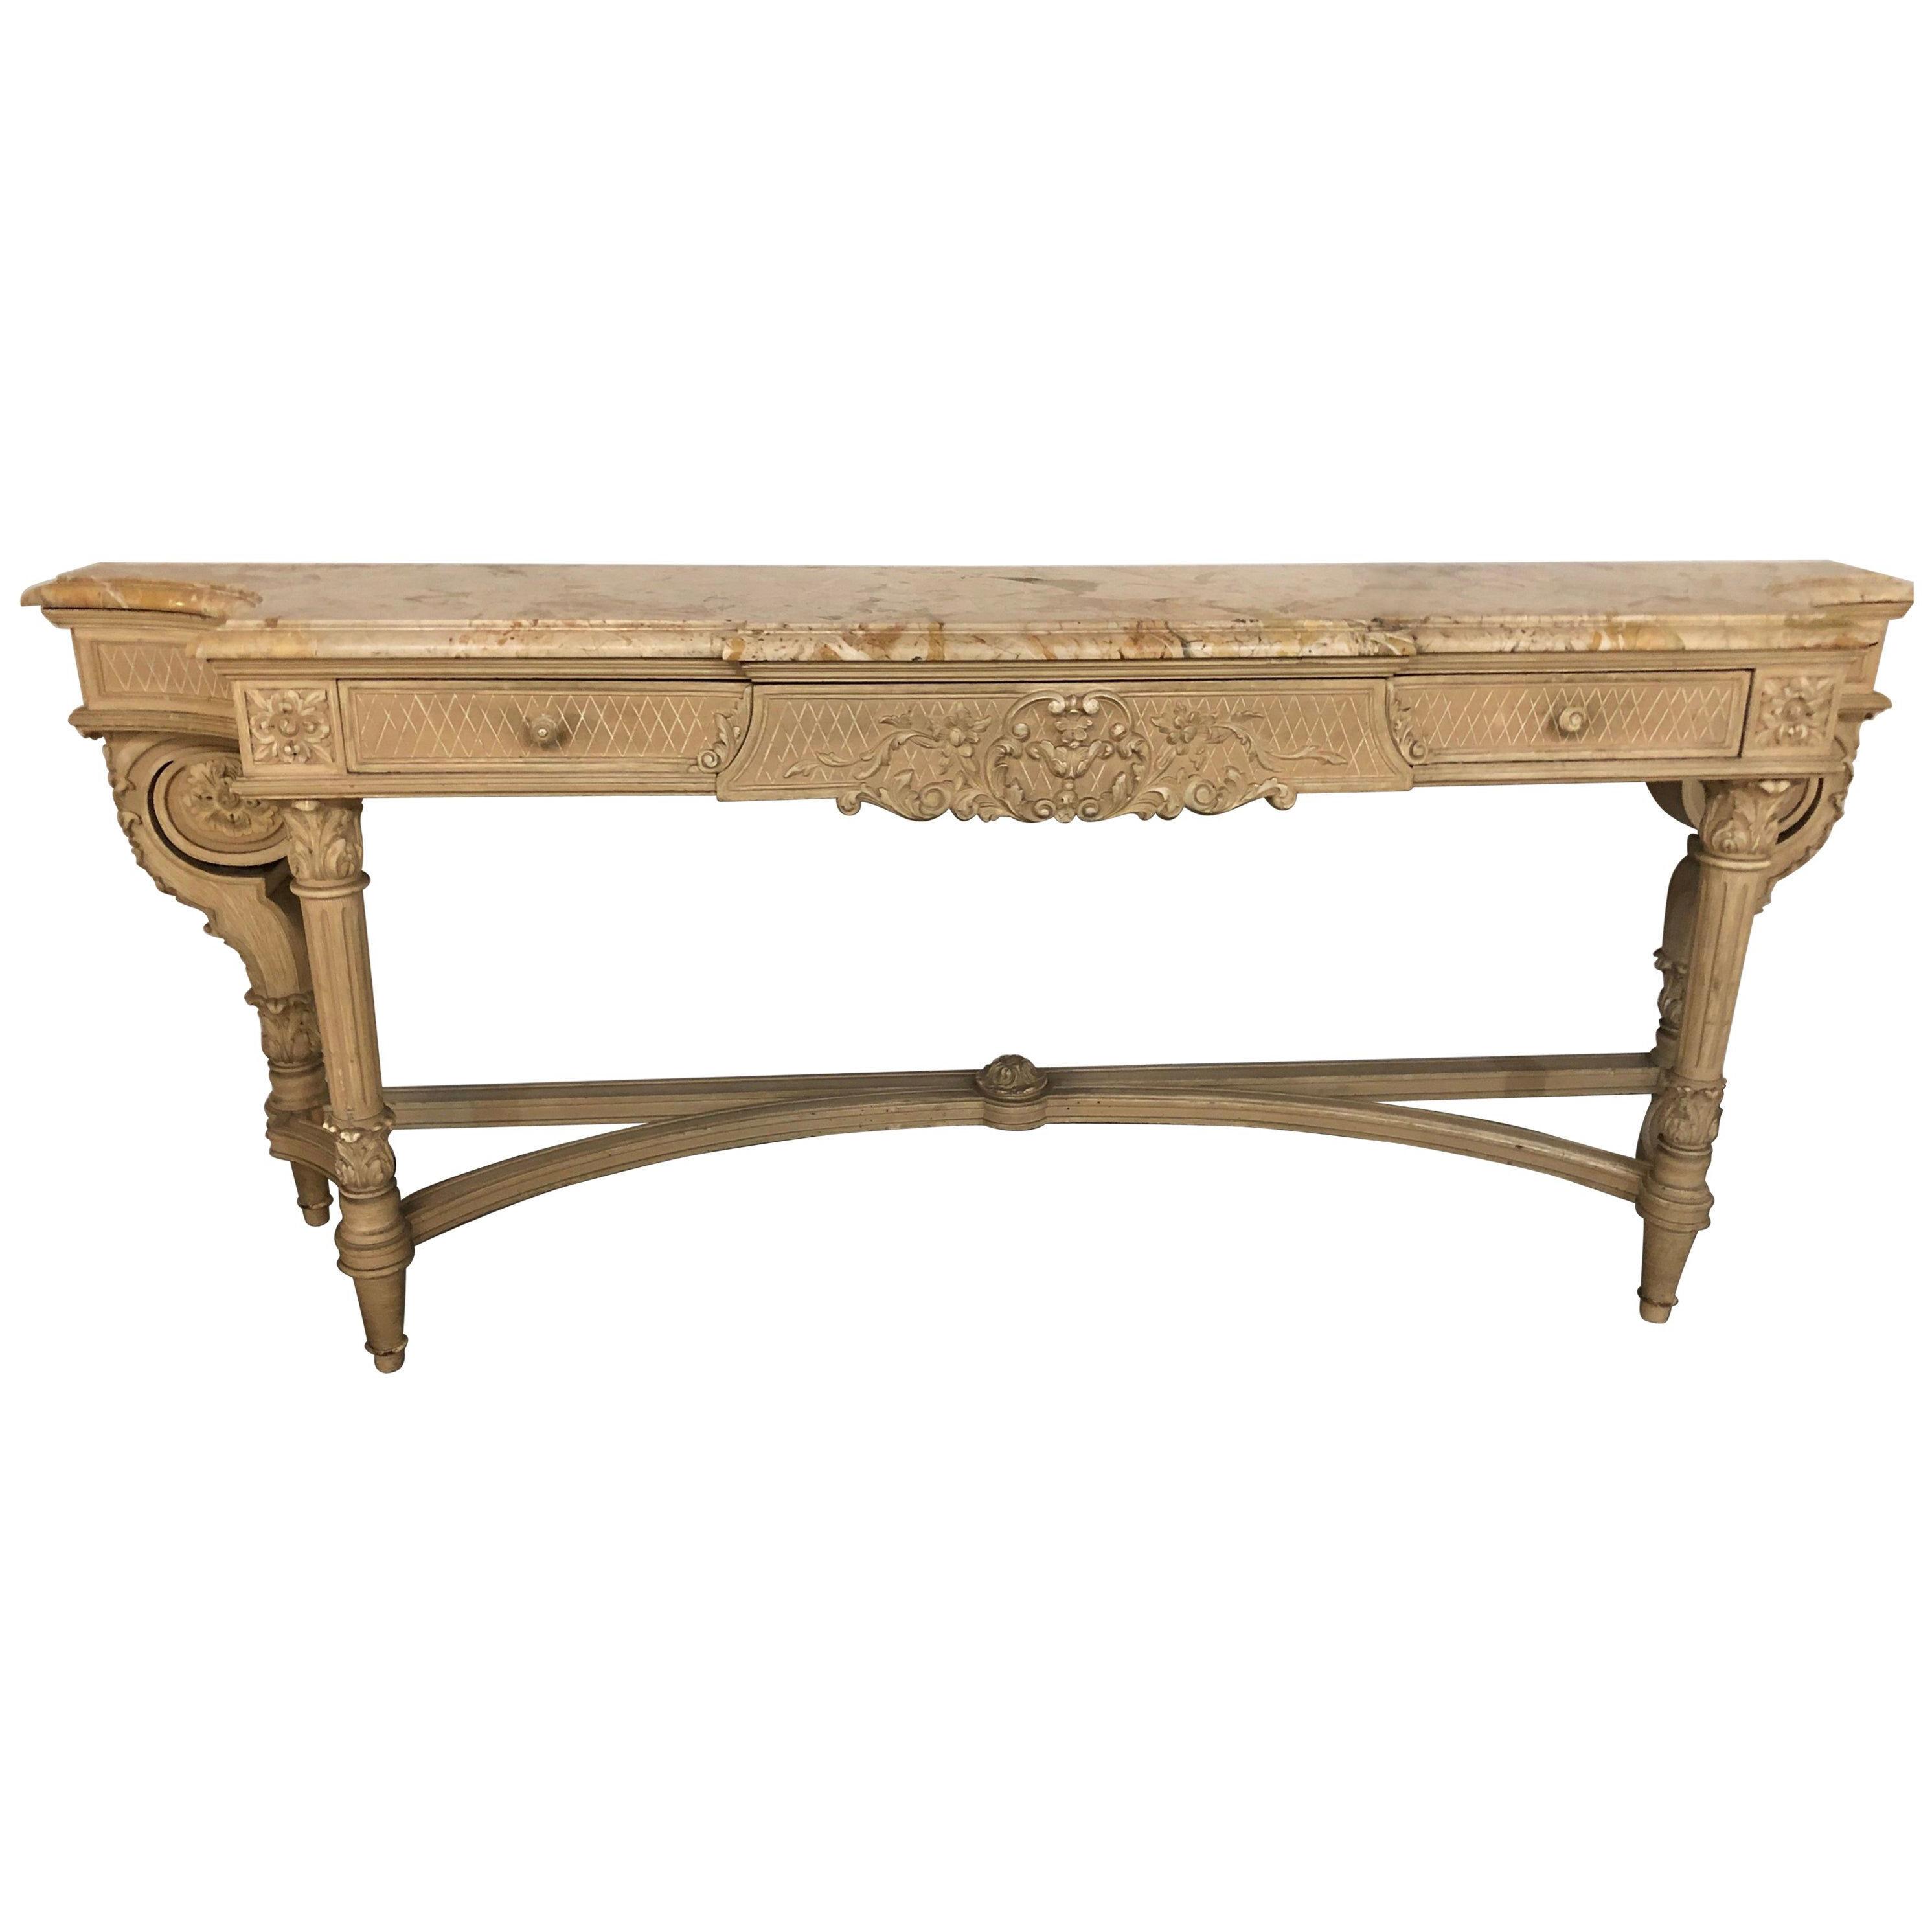 Antique Louis XVI Style Maison Jansen Marble-Top Sideboard or Console Table